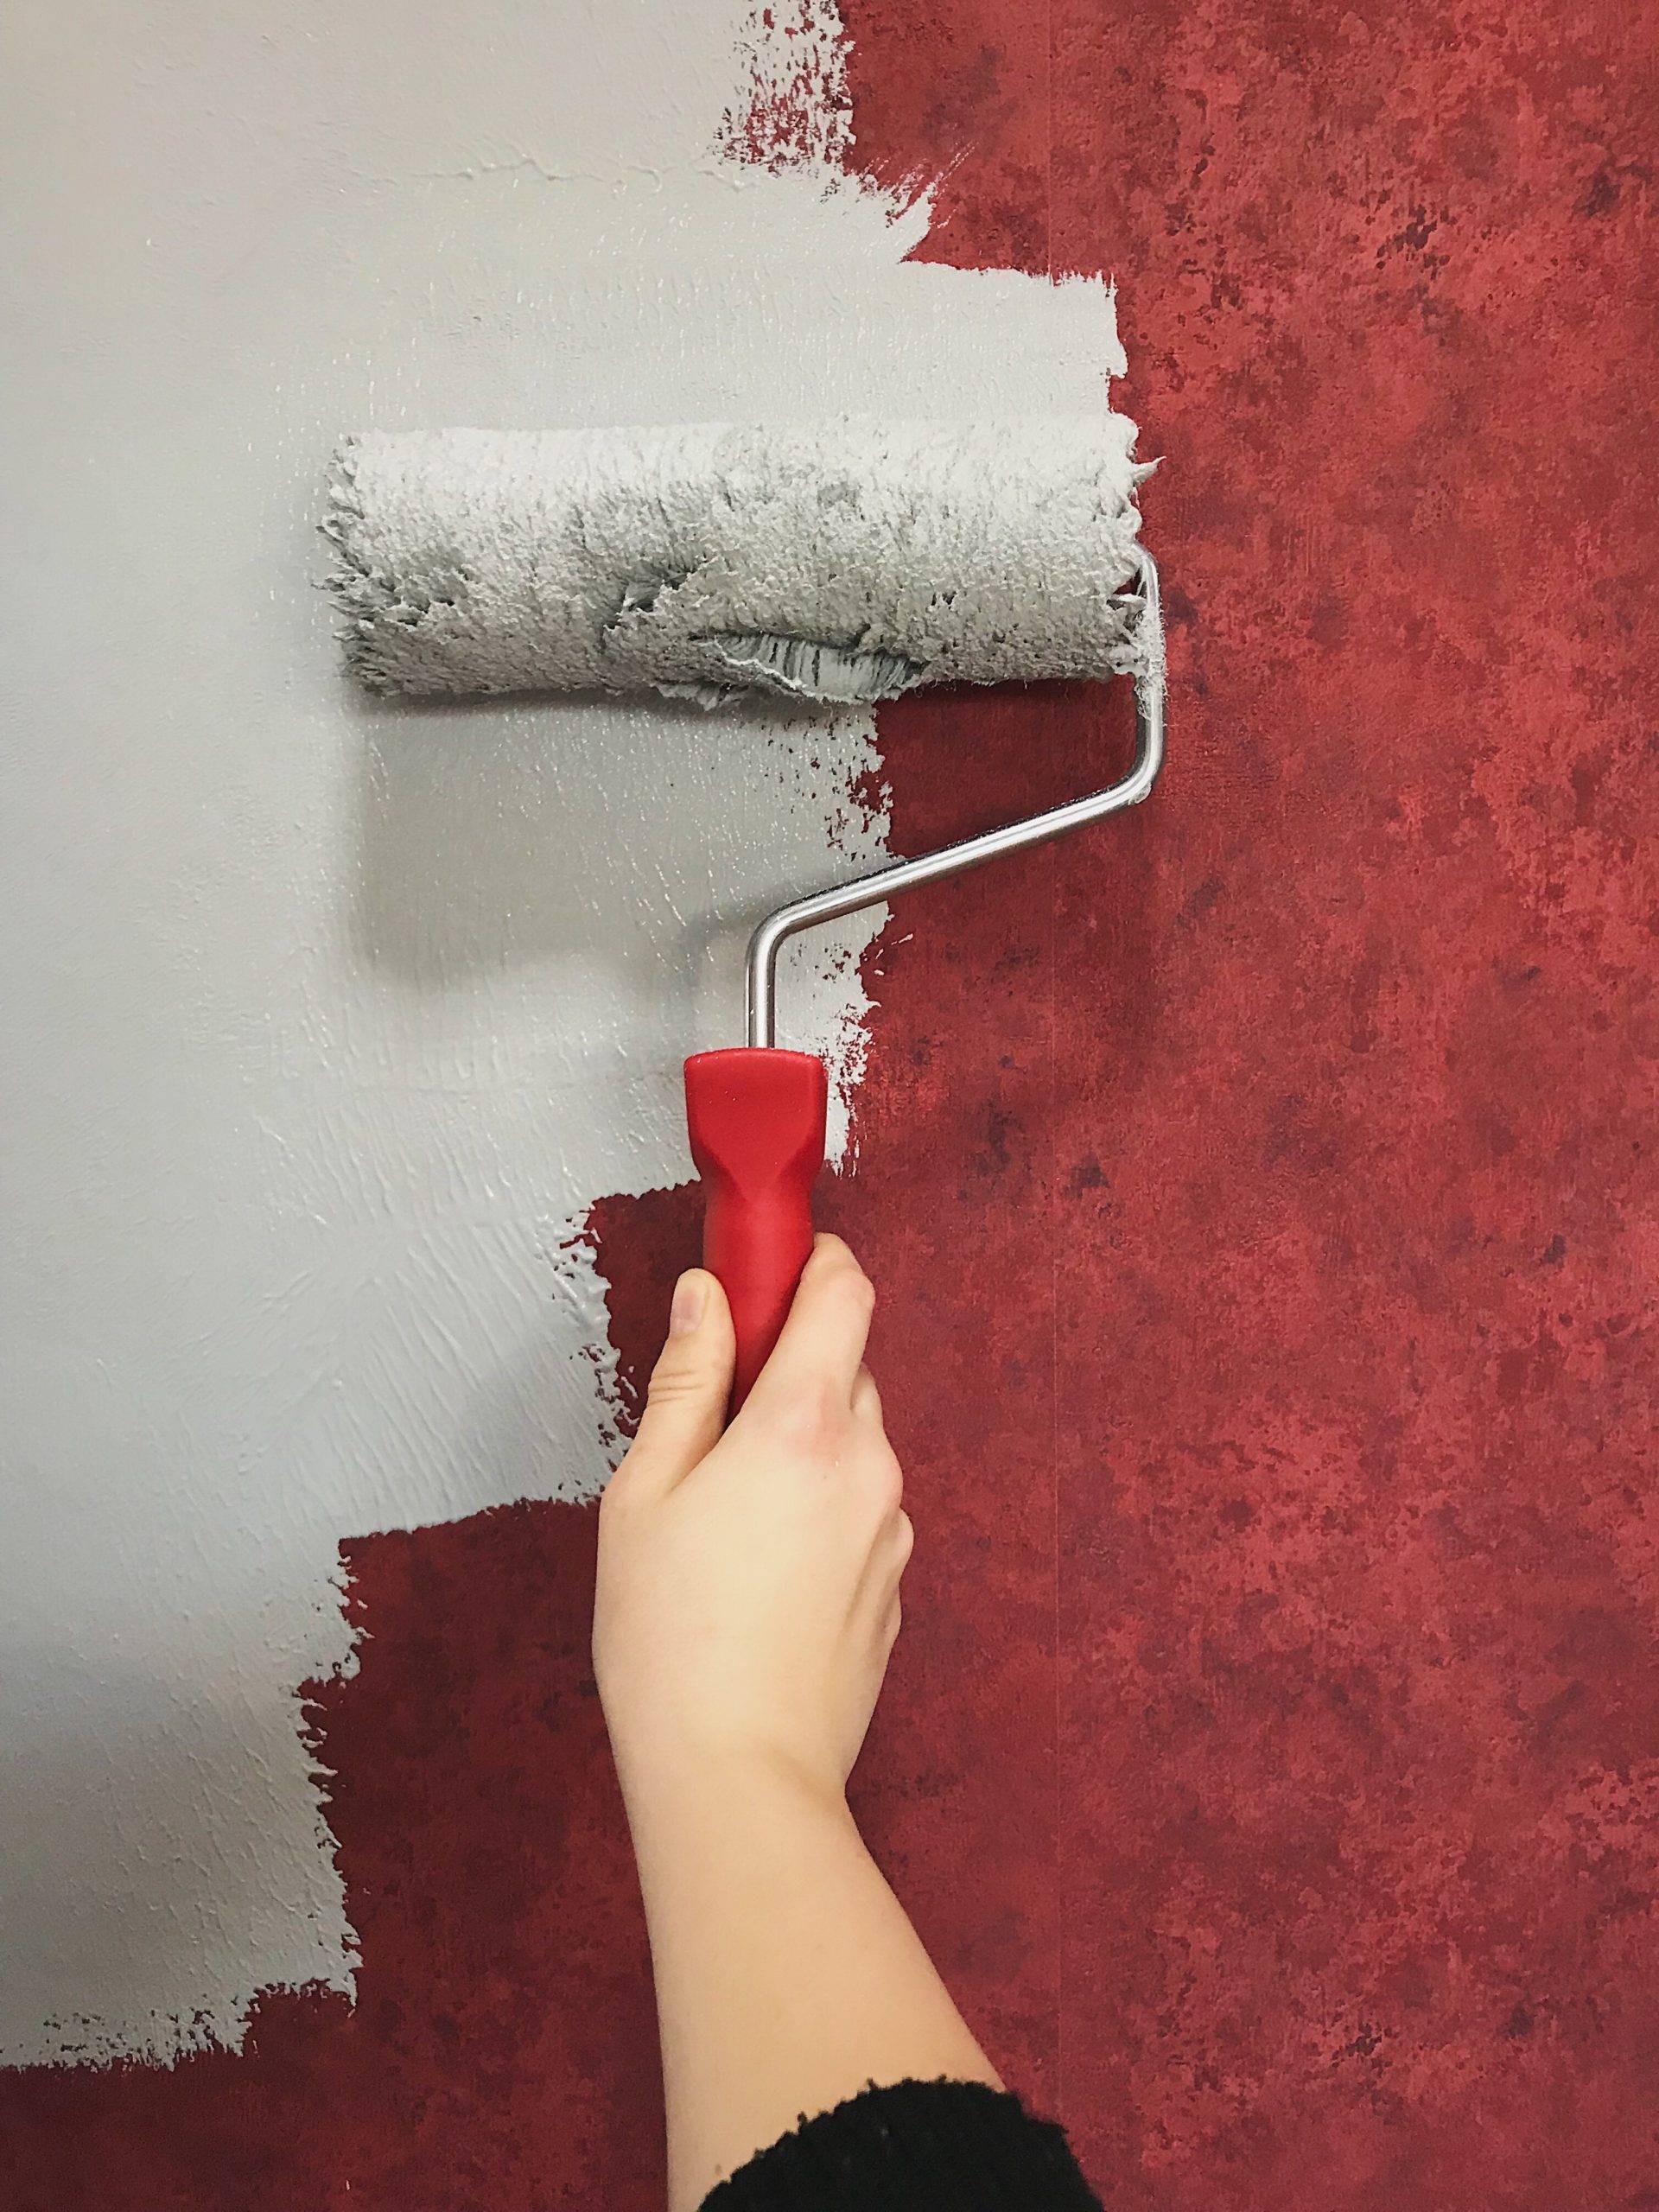 How to Properly Paint Over Wallpaper - ManMadeDIY